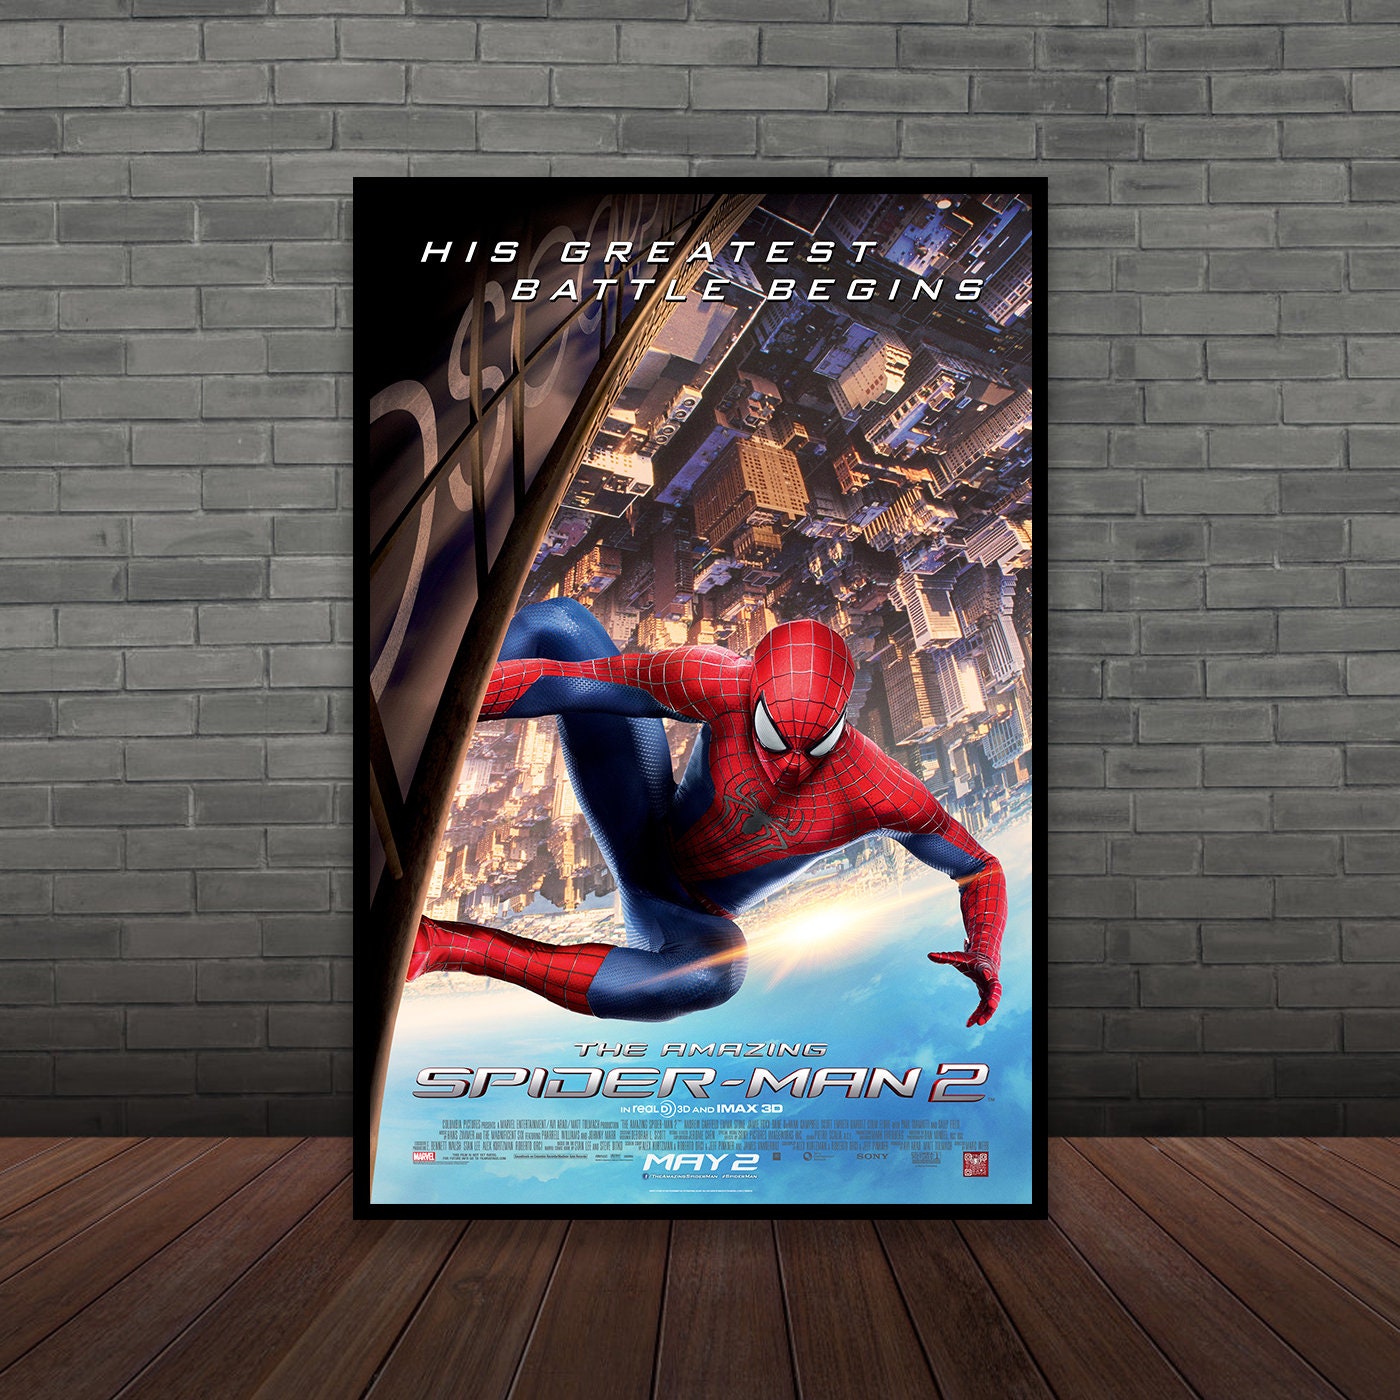 Spiderman 2 movie poster Tobey Maguire poster 11 x 17 (e